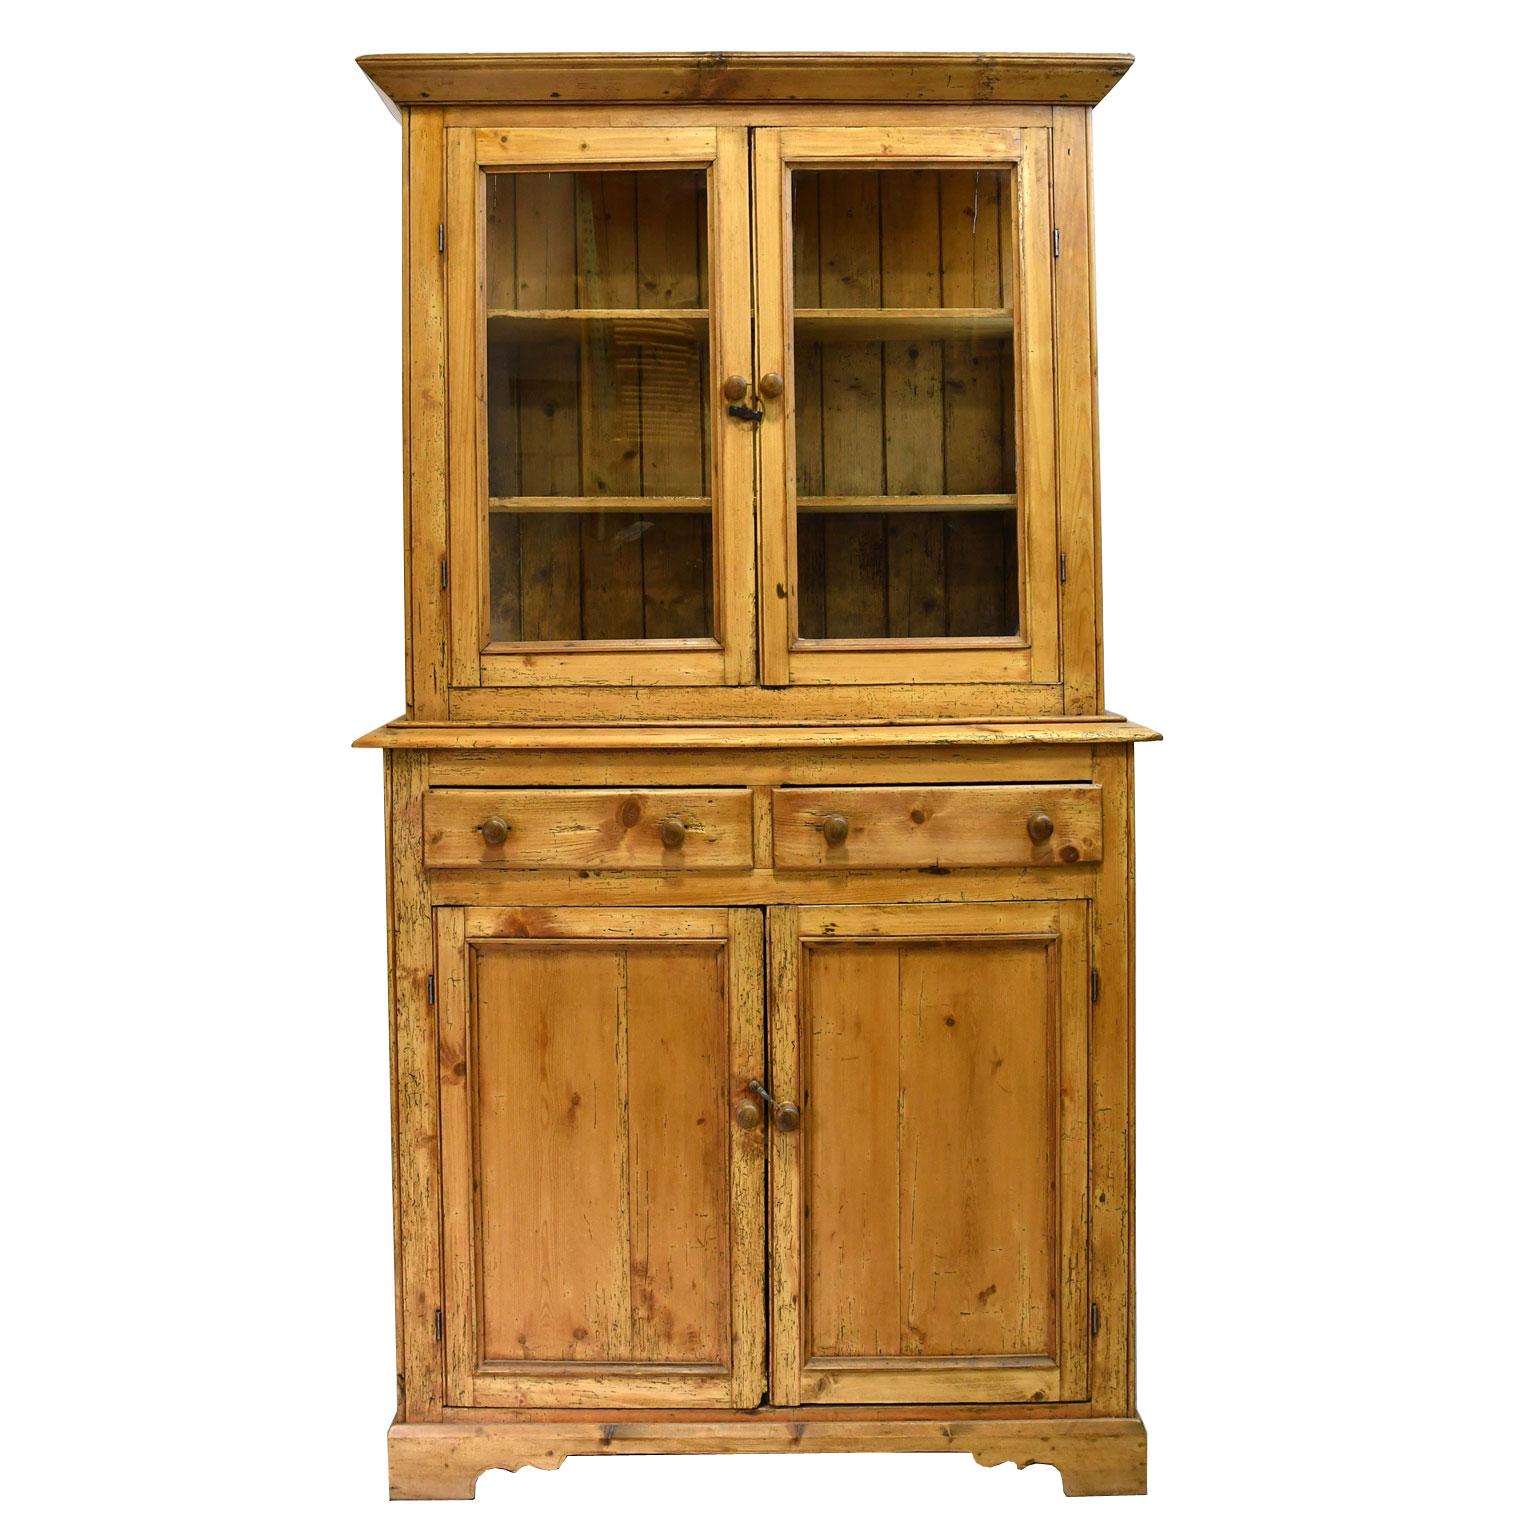 Rustic 19th Century English Country Cupboard in Pine with Glazed Doors